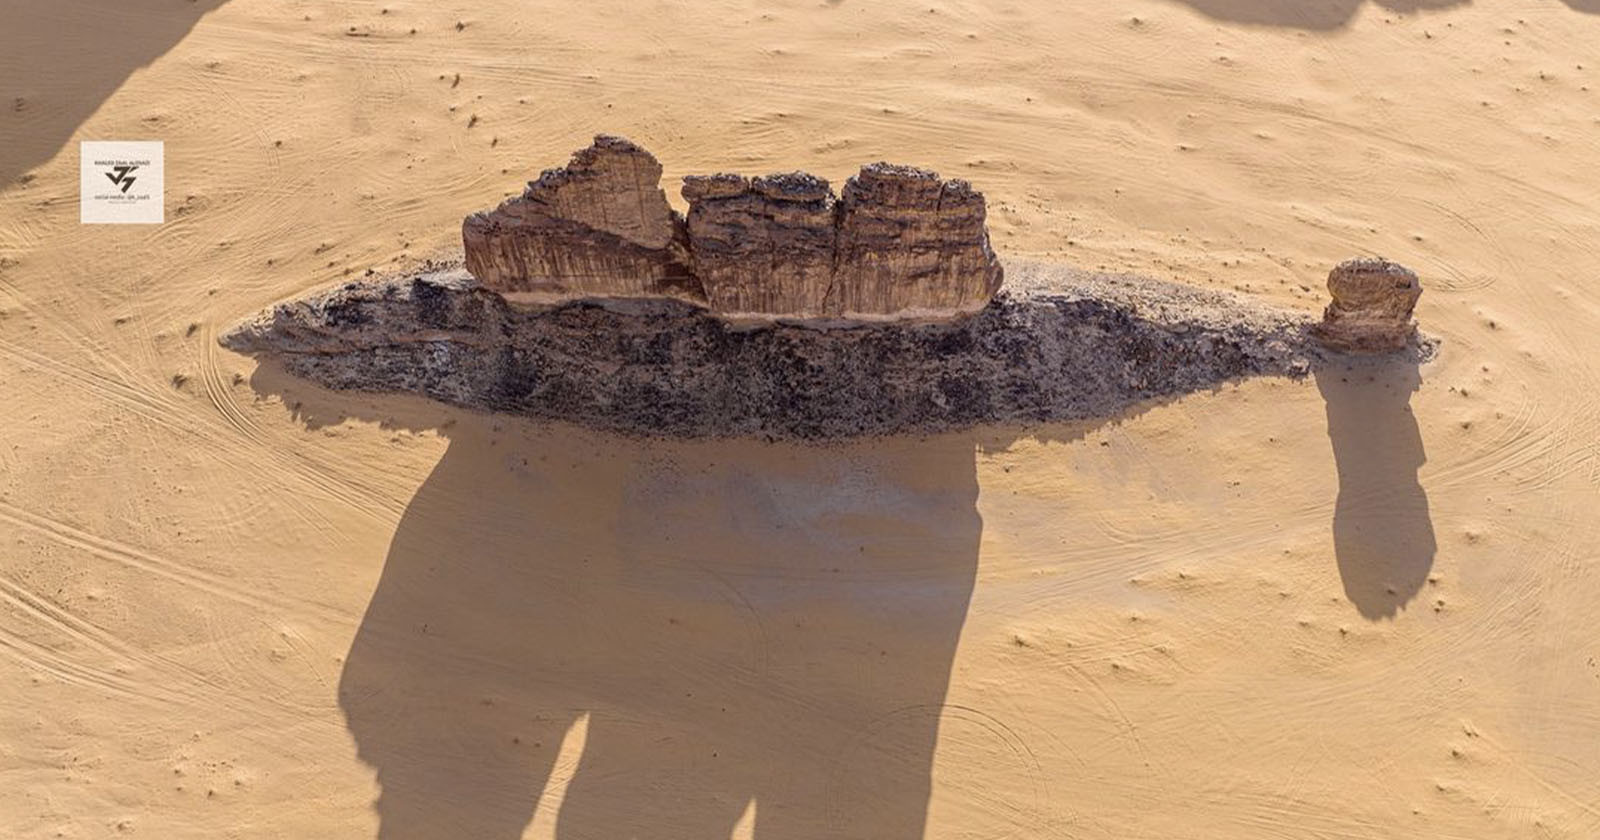  photographer discovers giant fish-shaped rock desert 